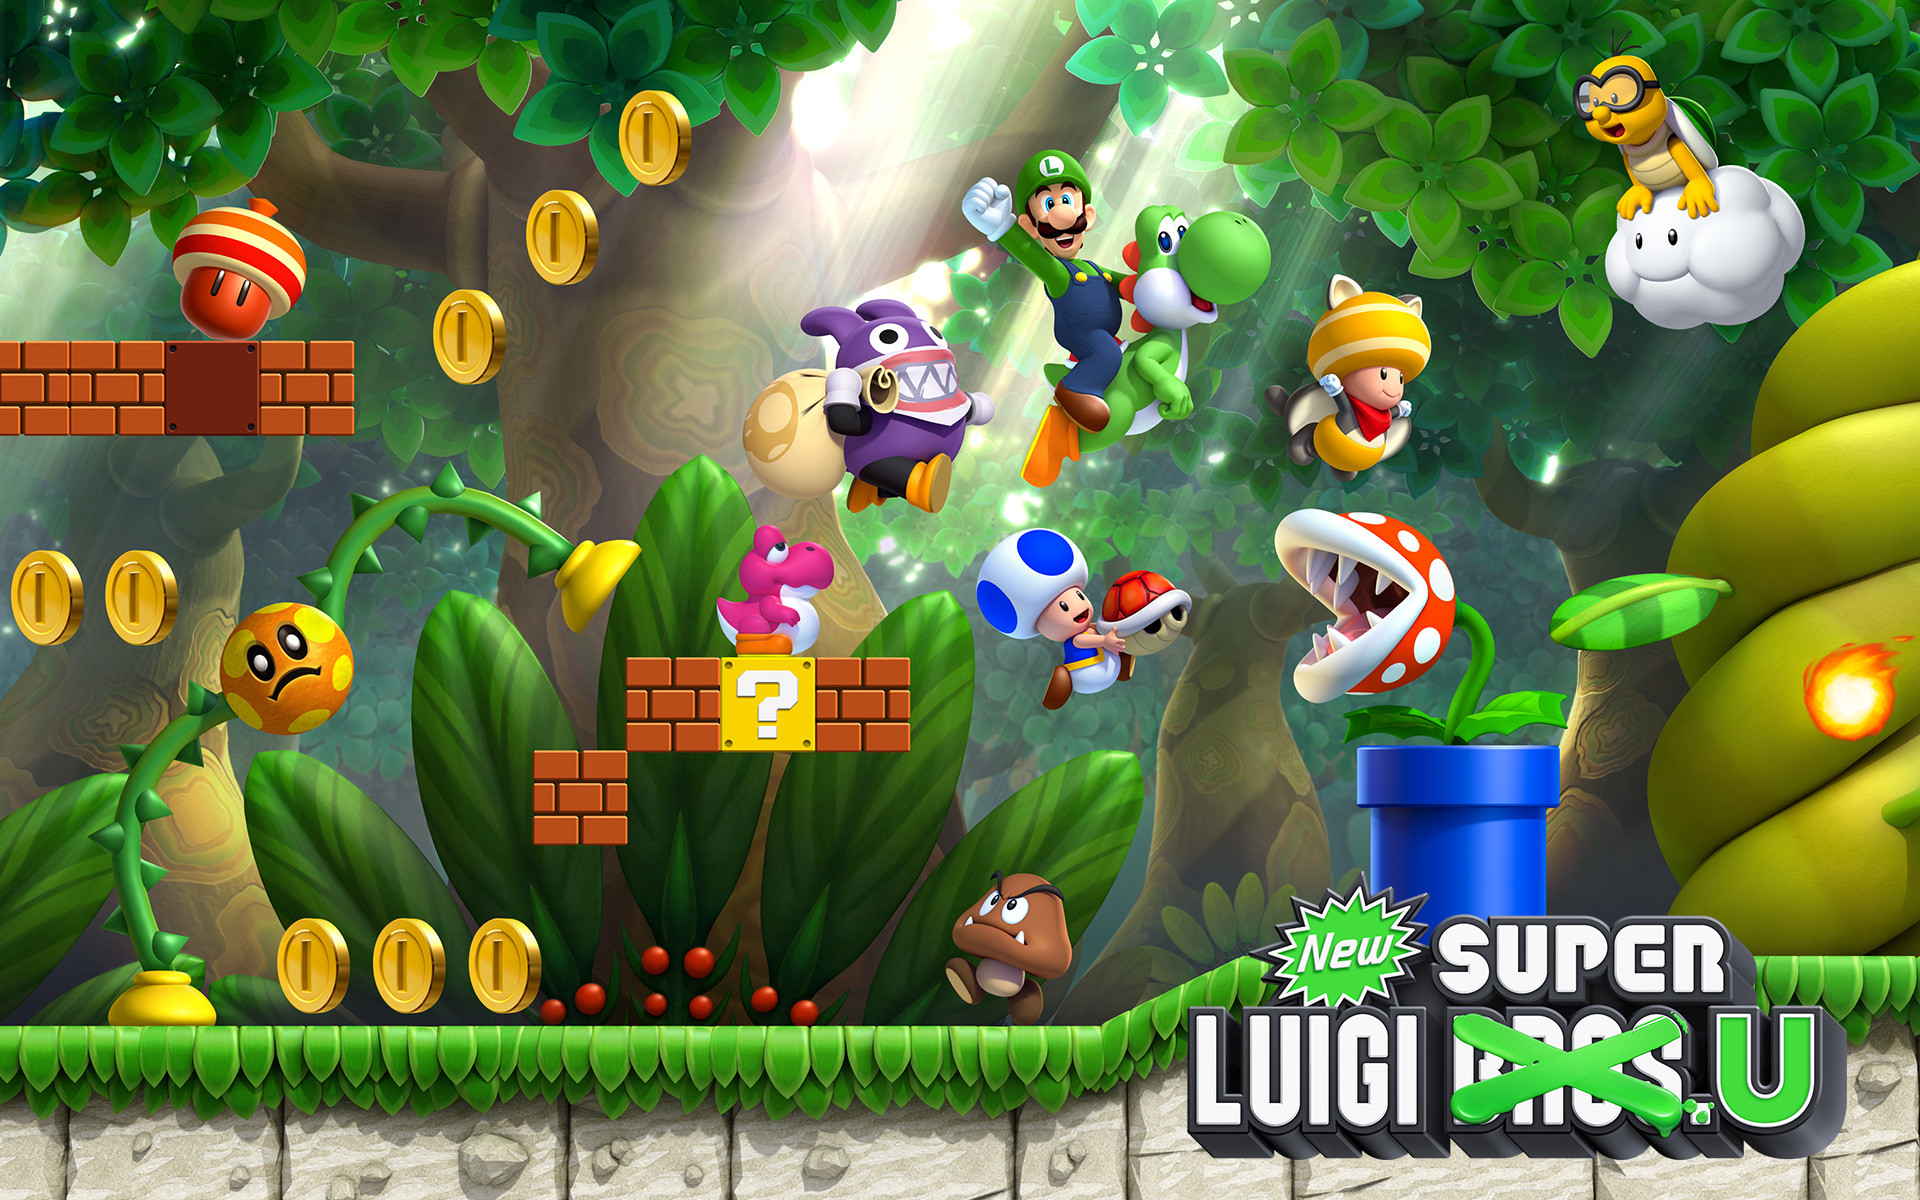 1920x1200 Super Mario Bros themed Wallpaper for your PC, tablet or mobile phone